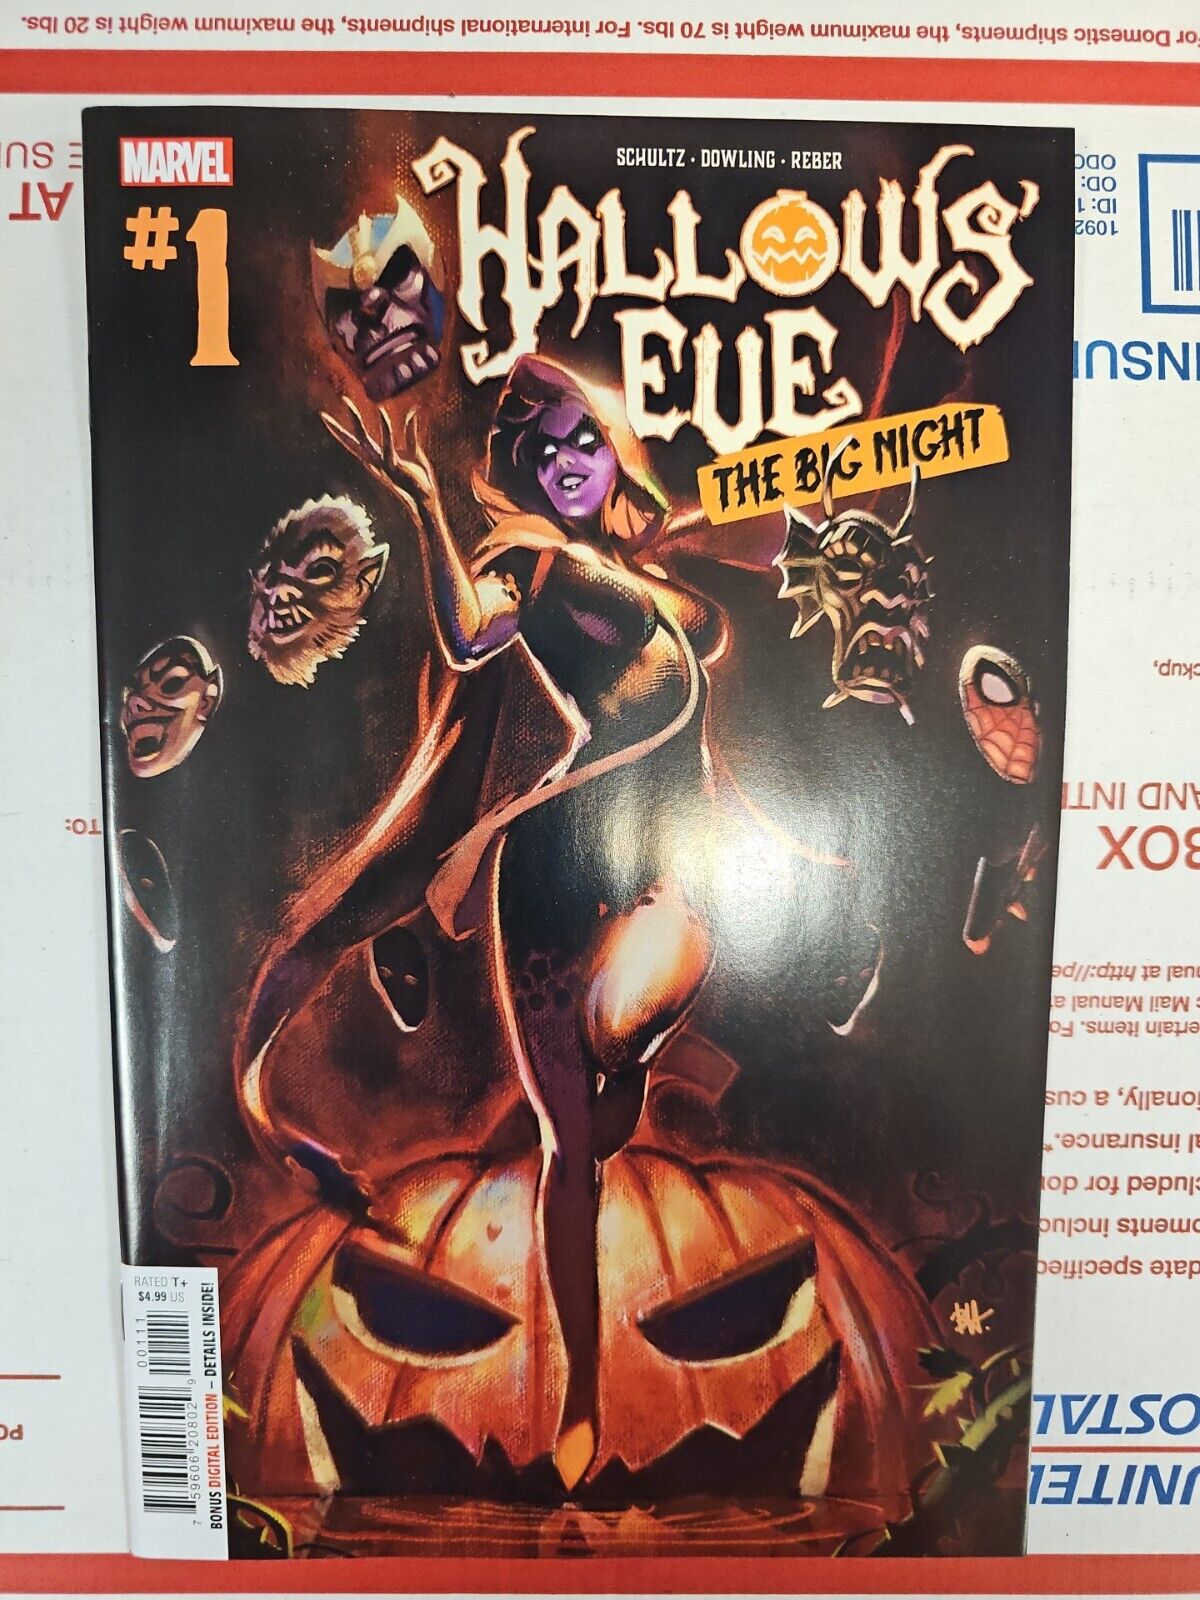 Hallows Eve The Big Night #1 Marvel 2023 NM- OR BETTER Comics